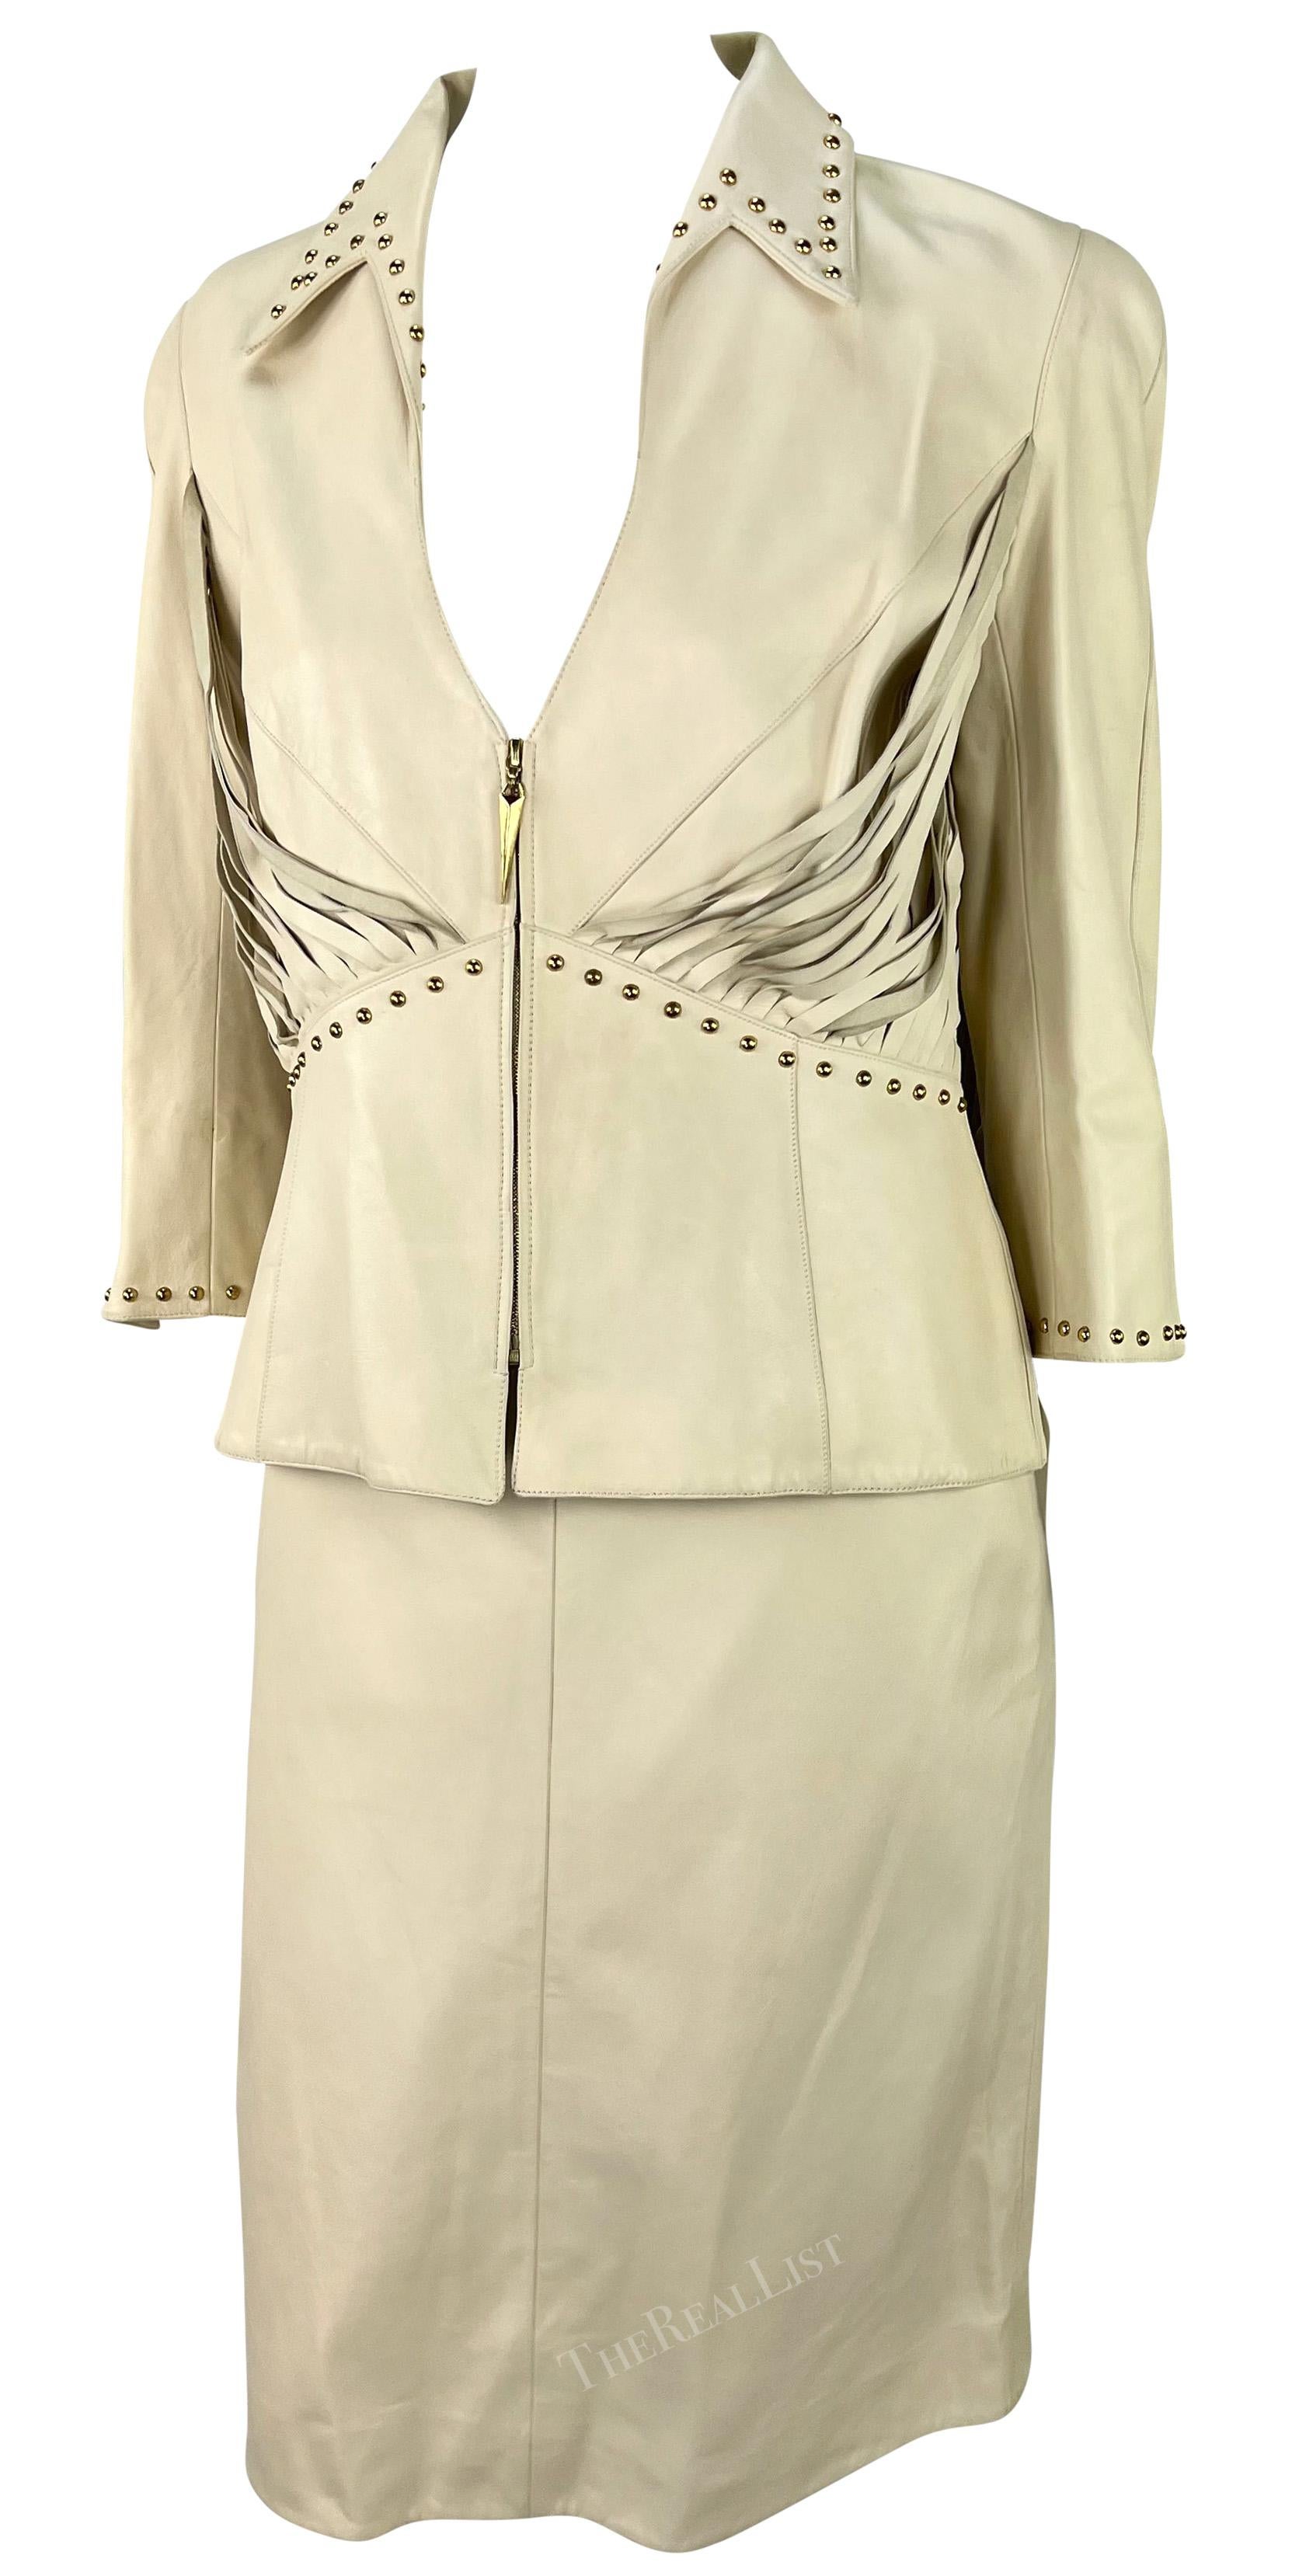 This cream-colored leather skirt set by Thierry Mugler, designed by Manfred Mugler, comes from the early 2000s. It includes a pencil skirt and a matching jacket, both made entirely of leather. The jacket has a plunging neckline, cropped sleeves, and